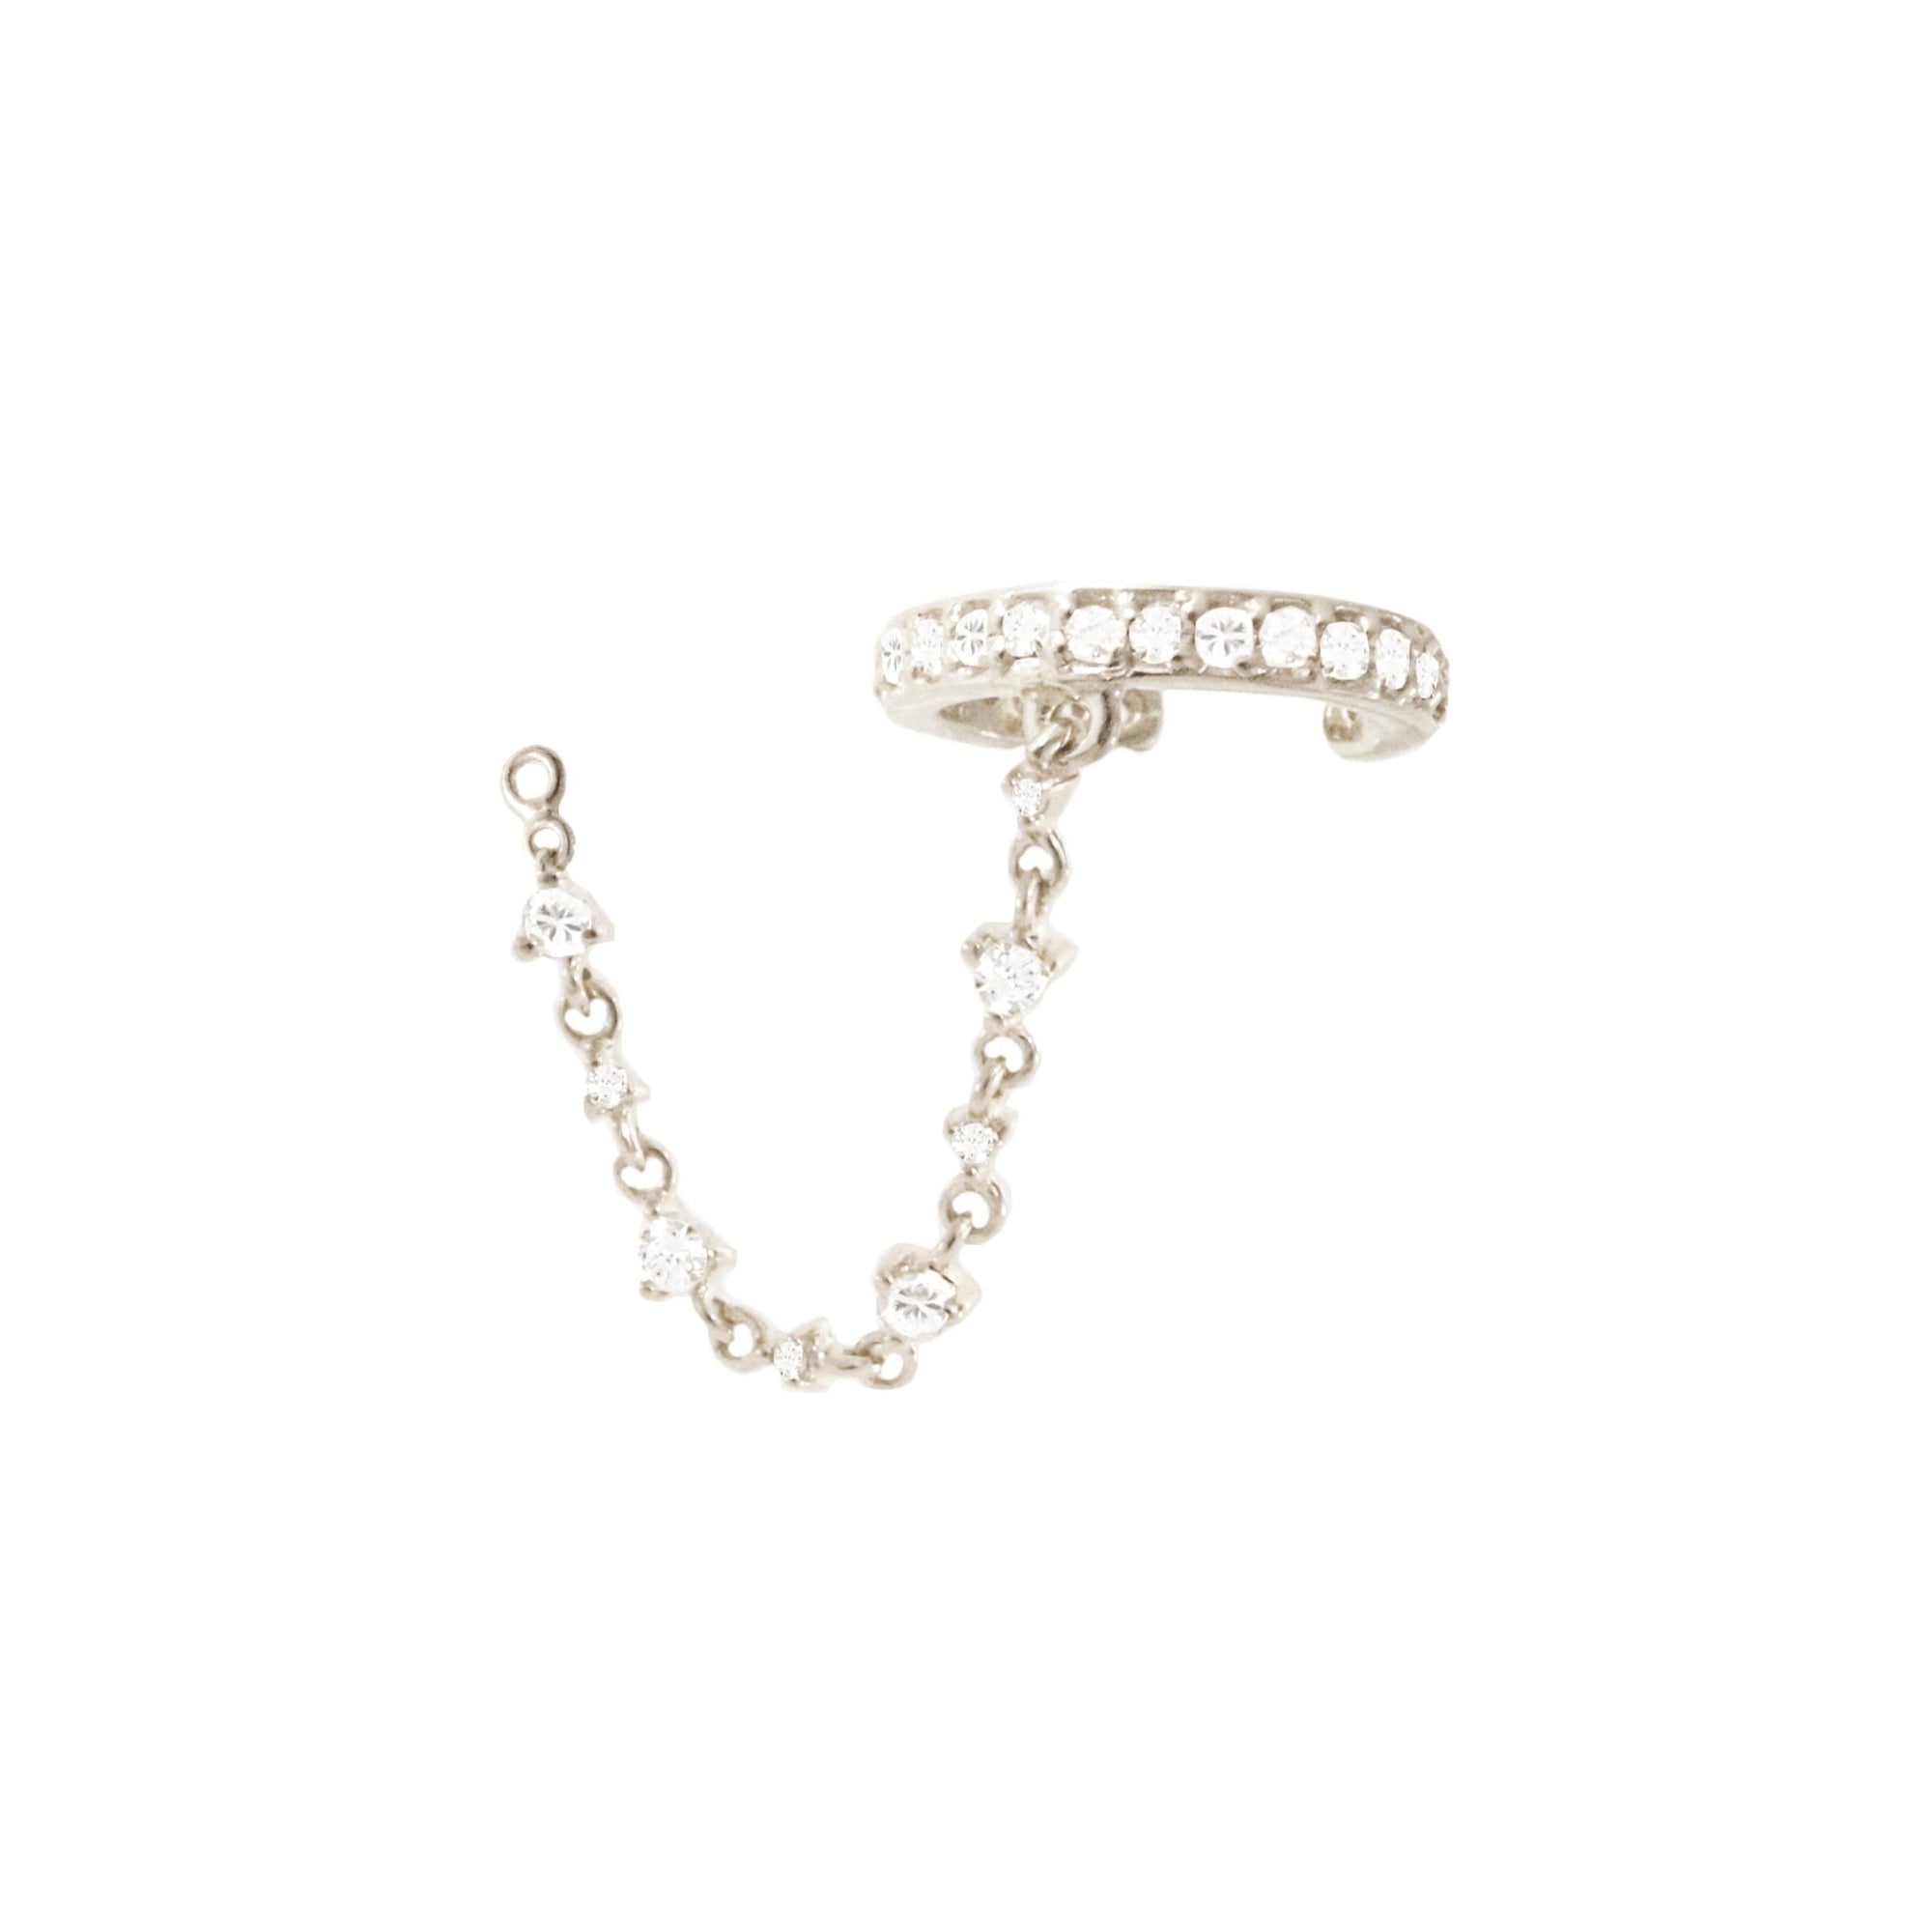 SCATTERED LOVE CHAIN EAR CUFF - CUBIC ZIRCONIA & SILVER - SO PRETTY CARA COTTER